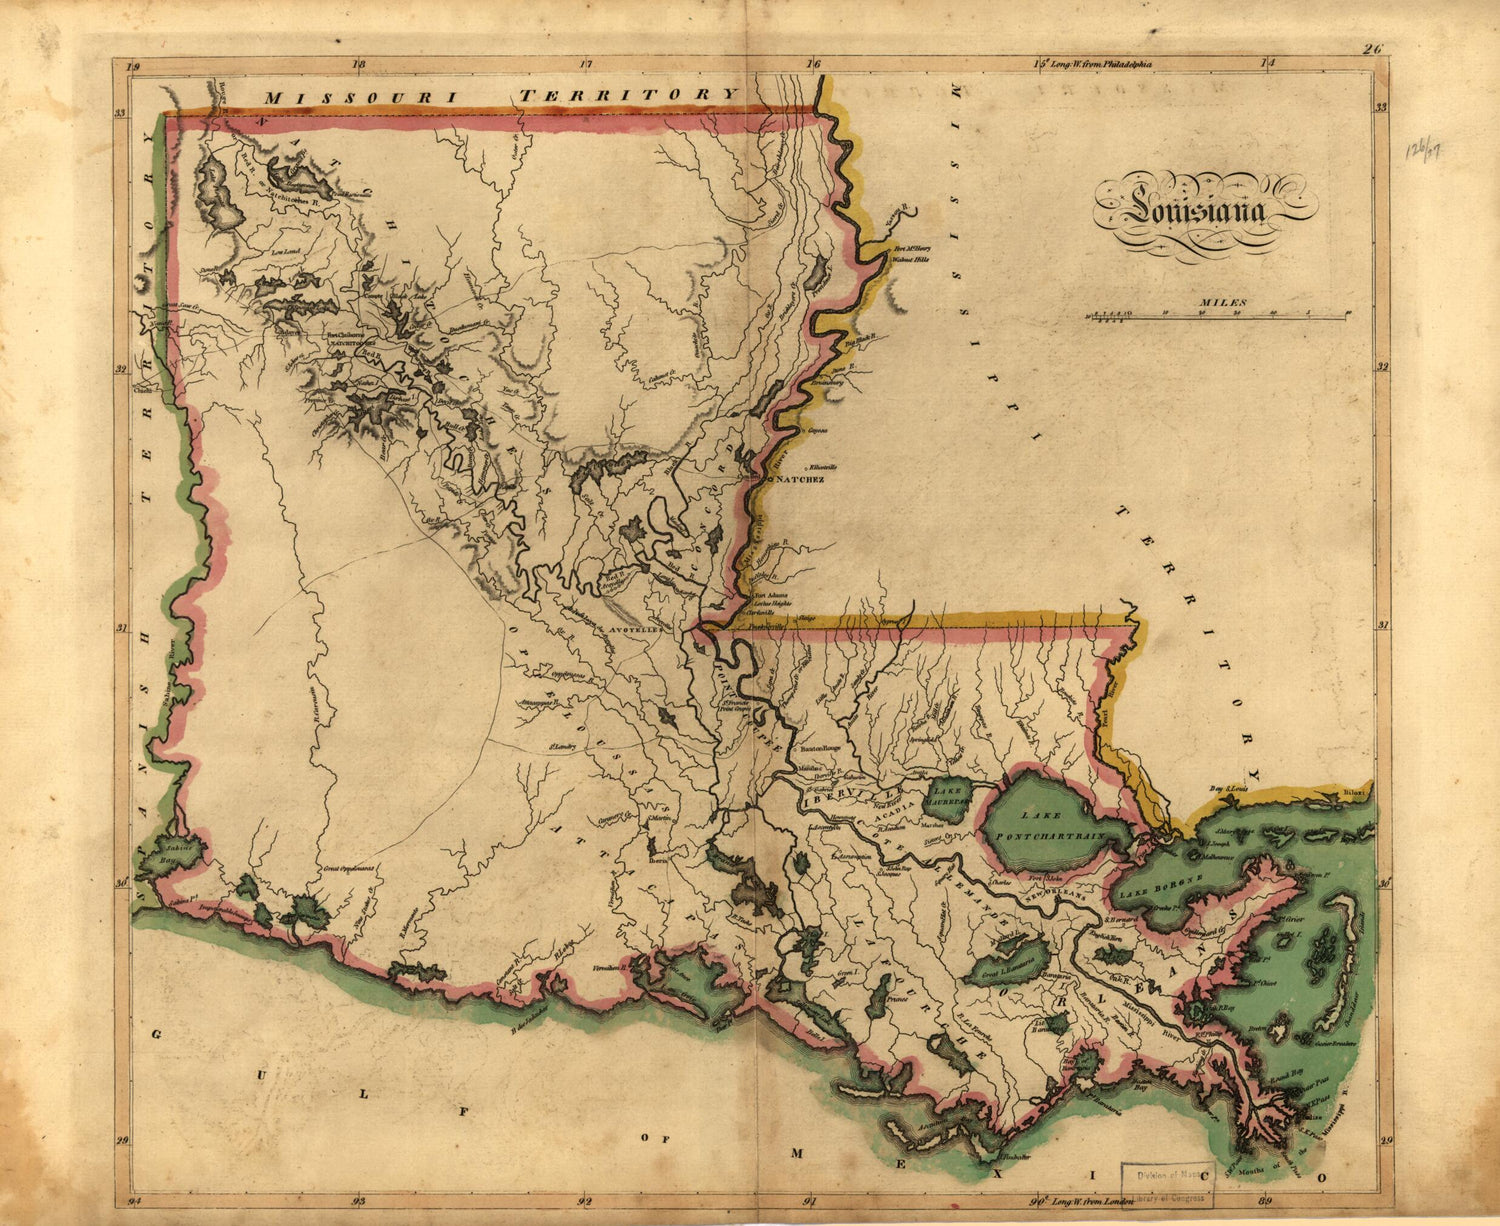 This old map of Louisiana from 1814 was created by Mathew Carey in 1814